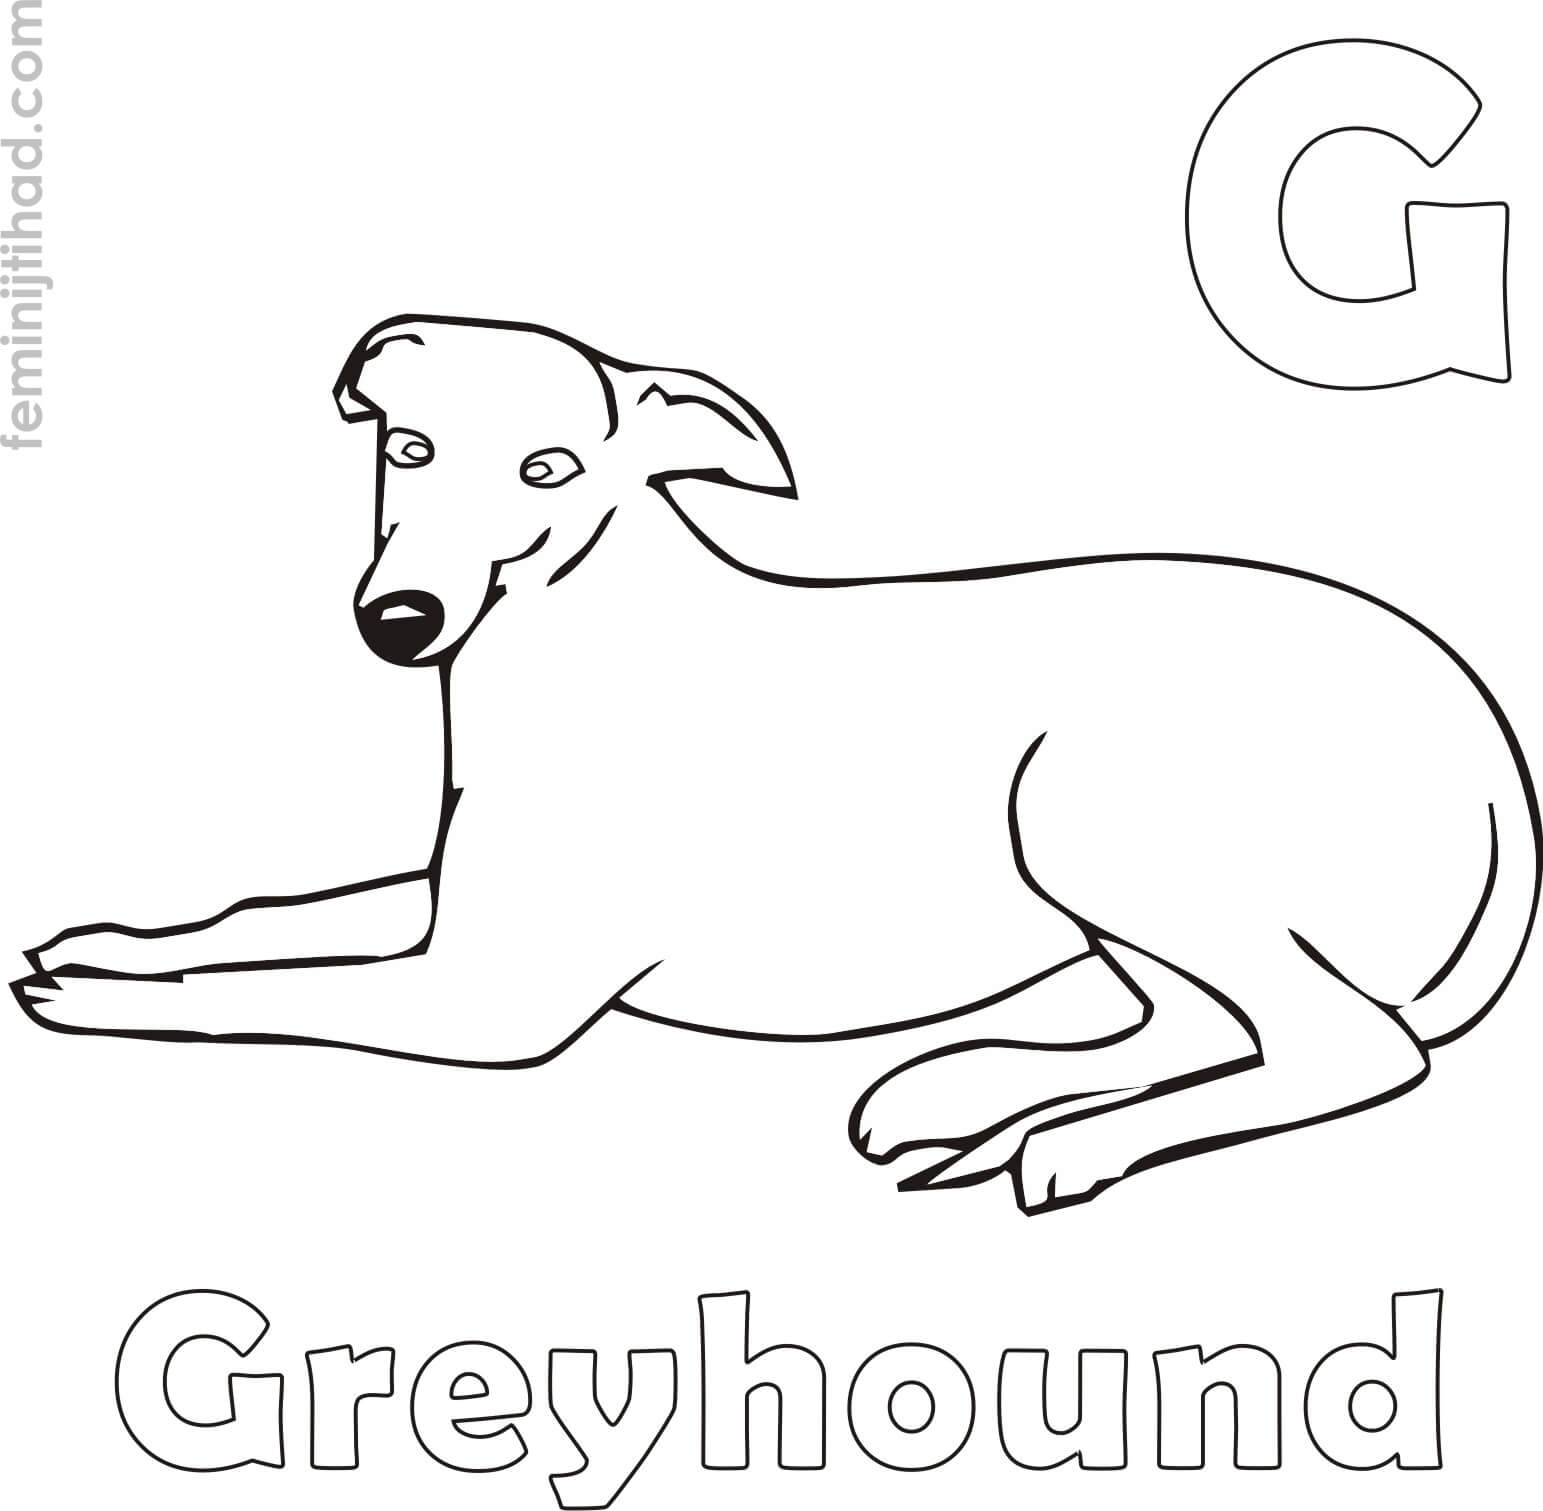 greyhound coloring page free